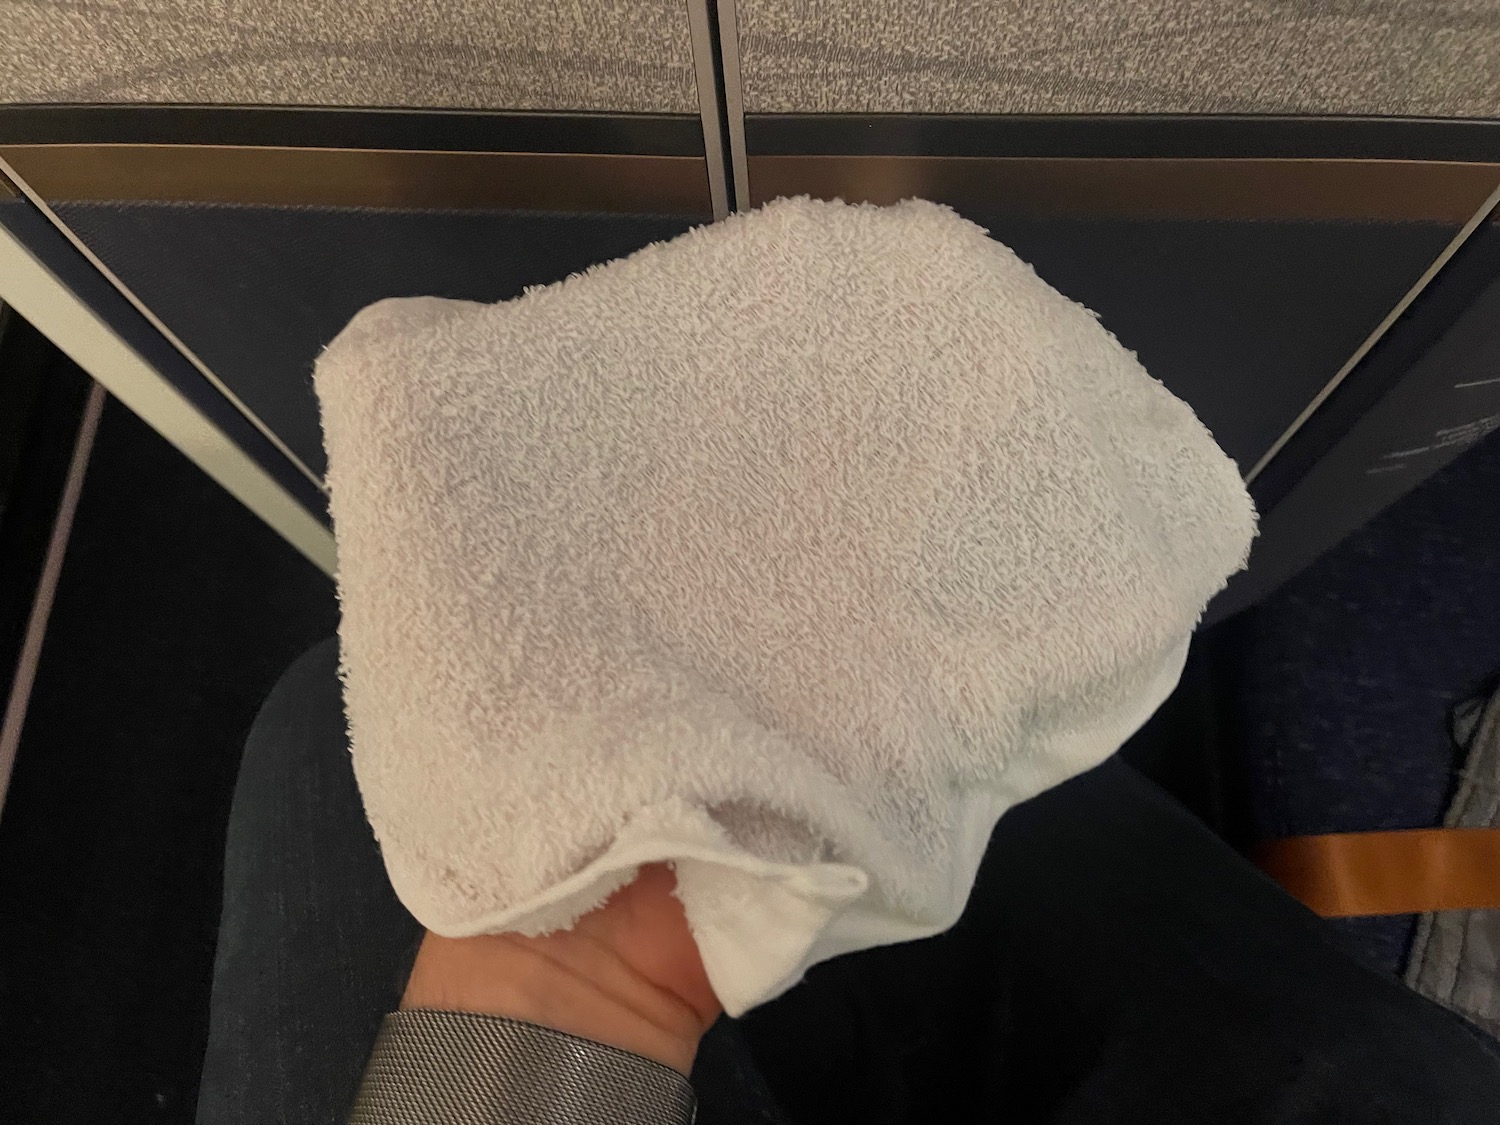 a hand holding a white towel